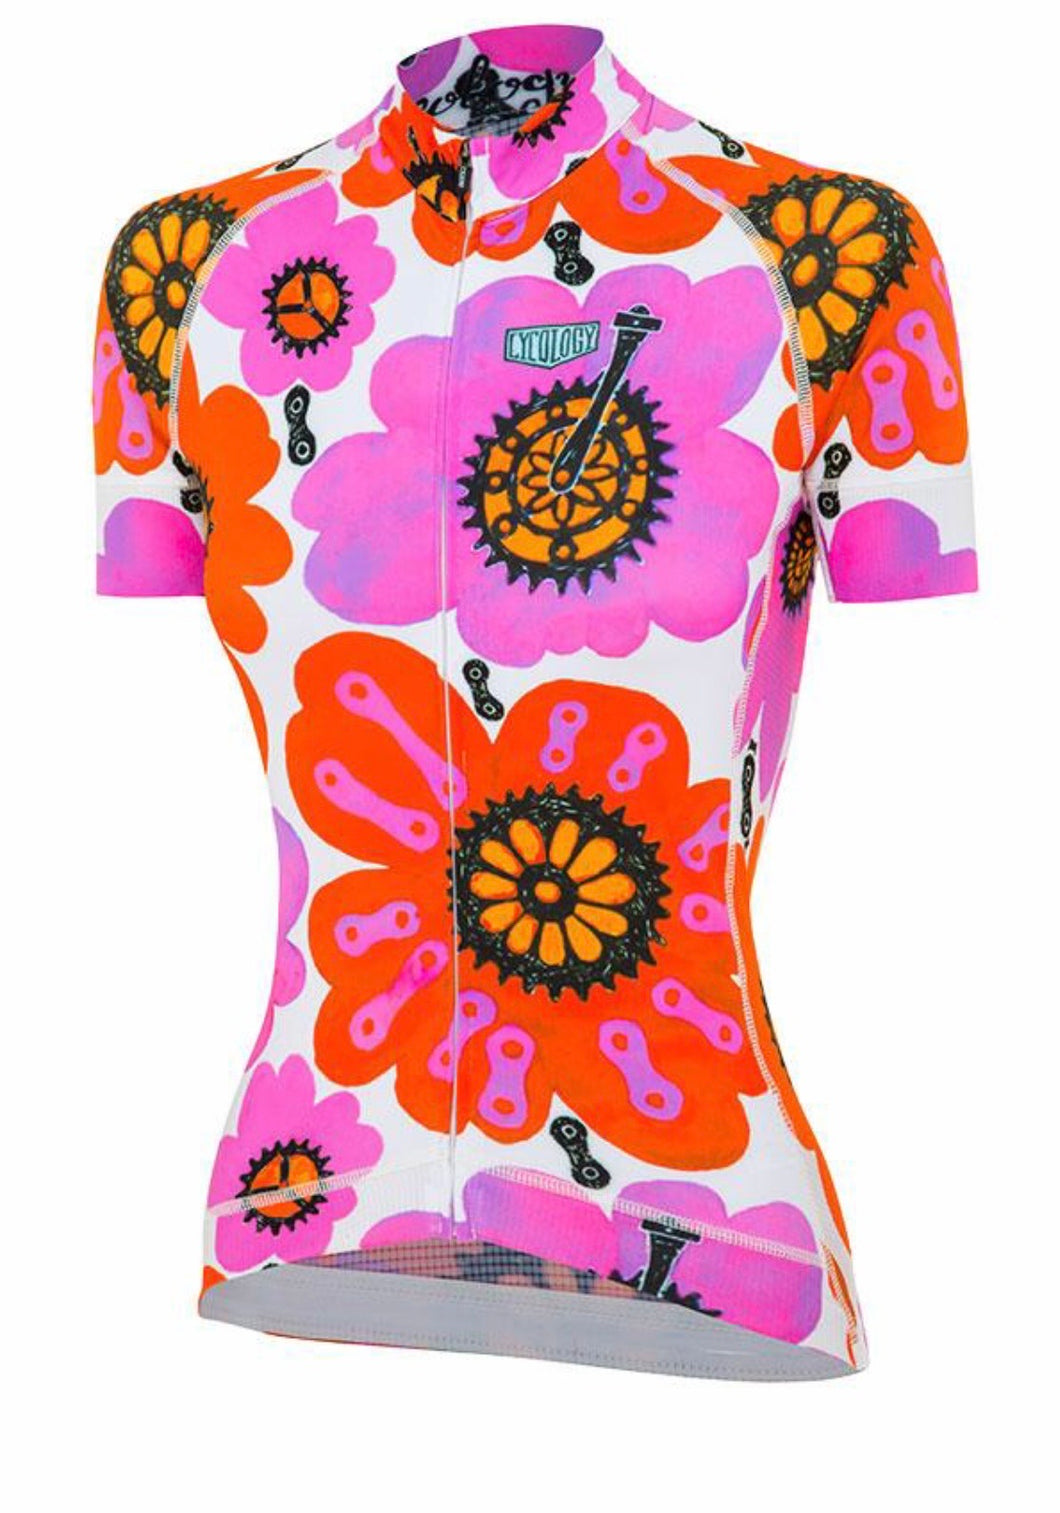 Cycology Quality Womens Jersey - Design Pedal Flower